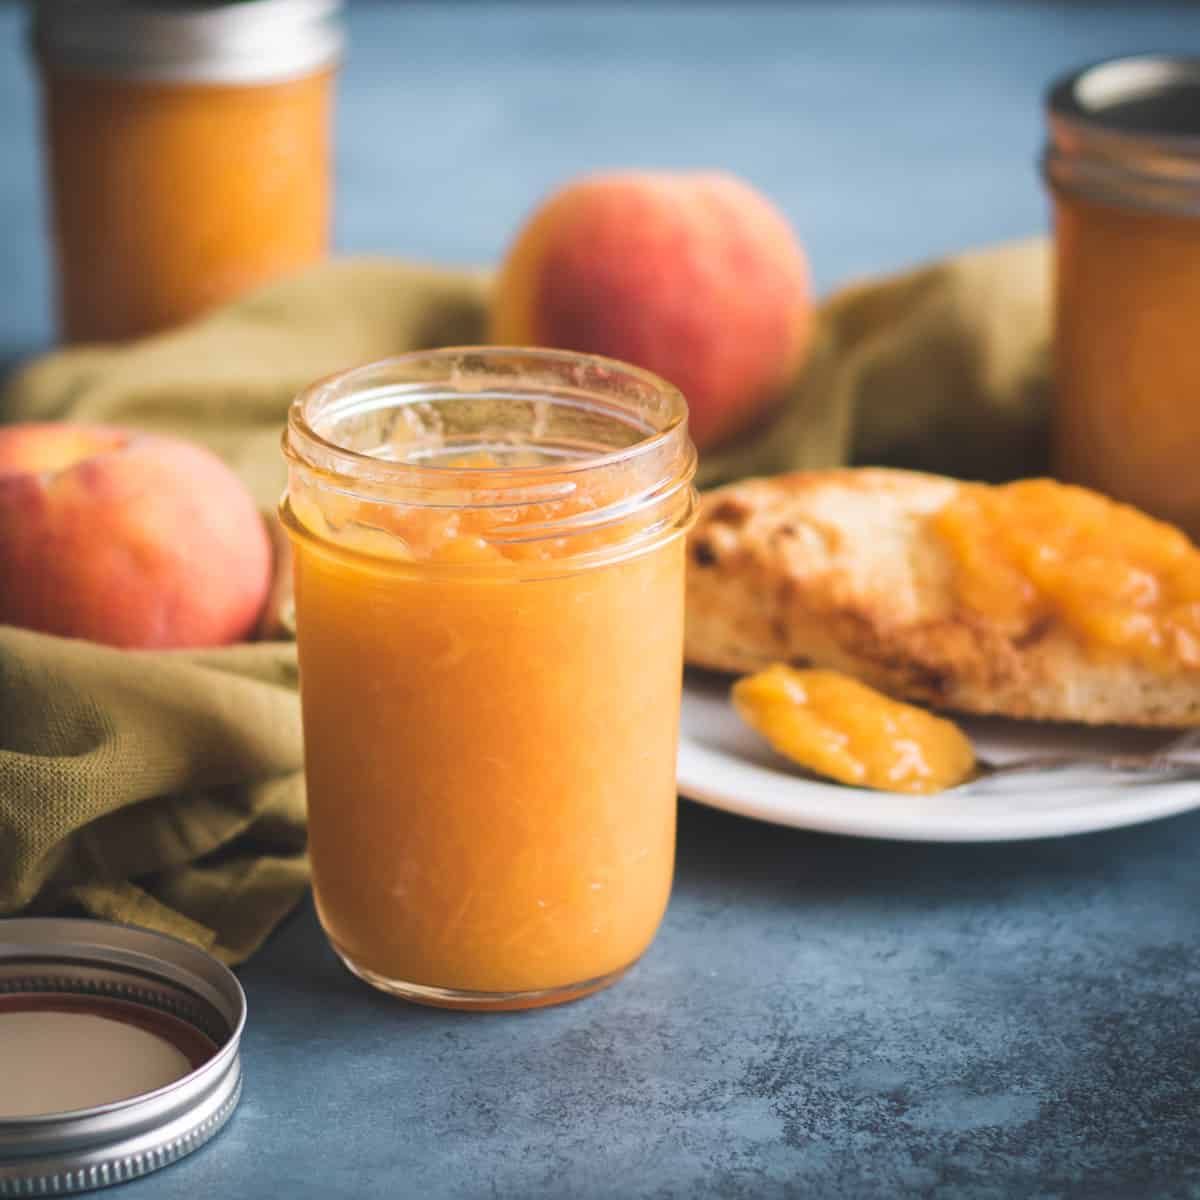 A jar of peach jam surrounded by a plate of toast with peach jam, whole peaches, and more jars of peach jam. On a blue surface with a natural colored cloth weaving through.